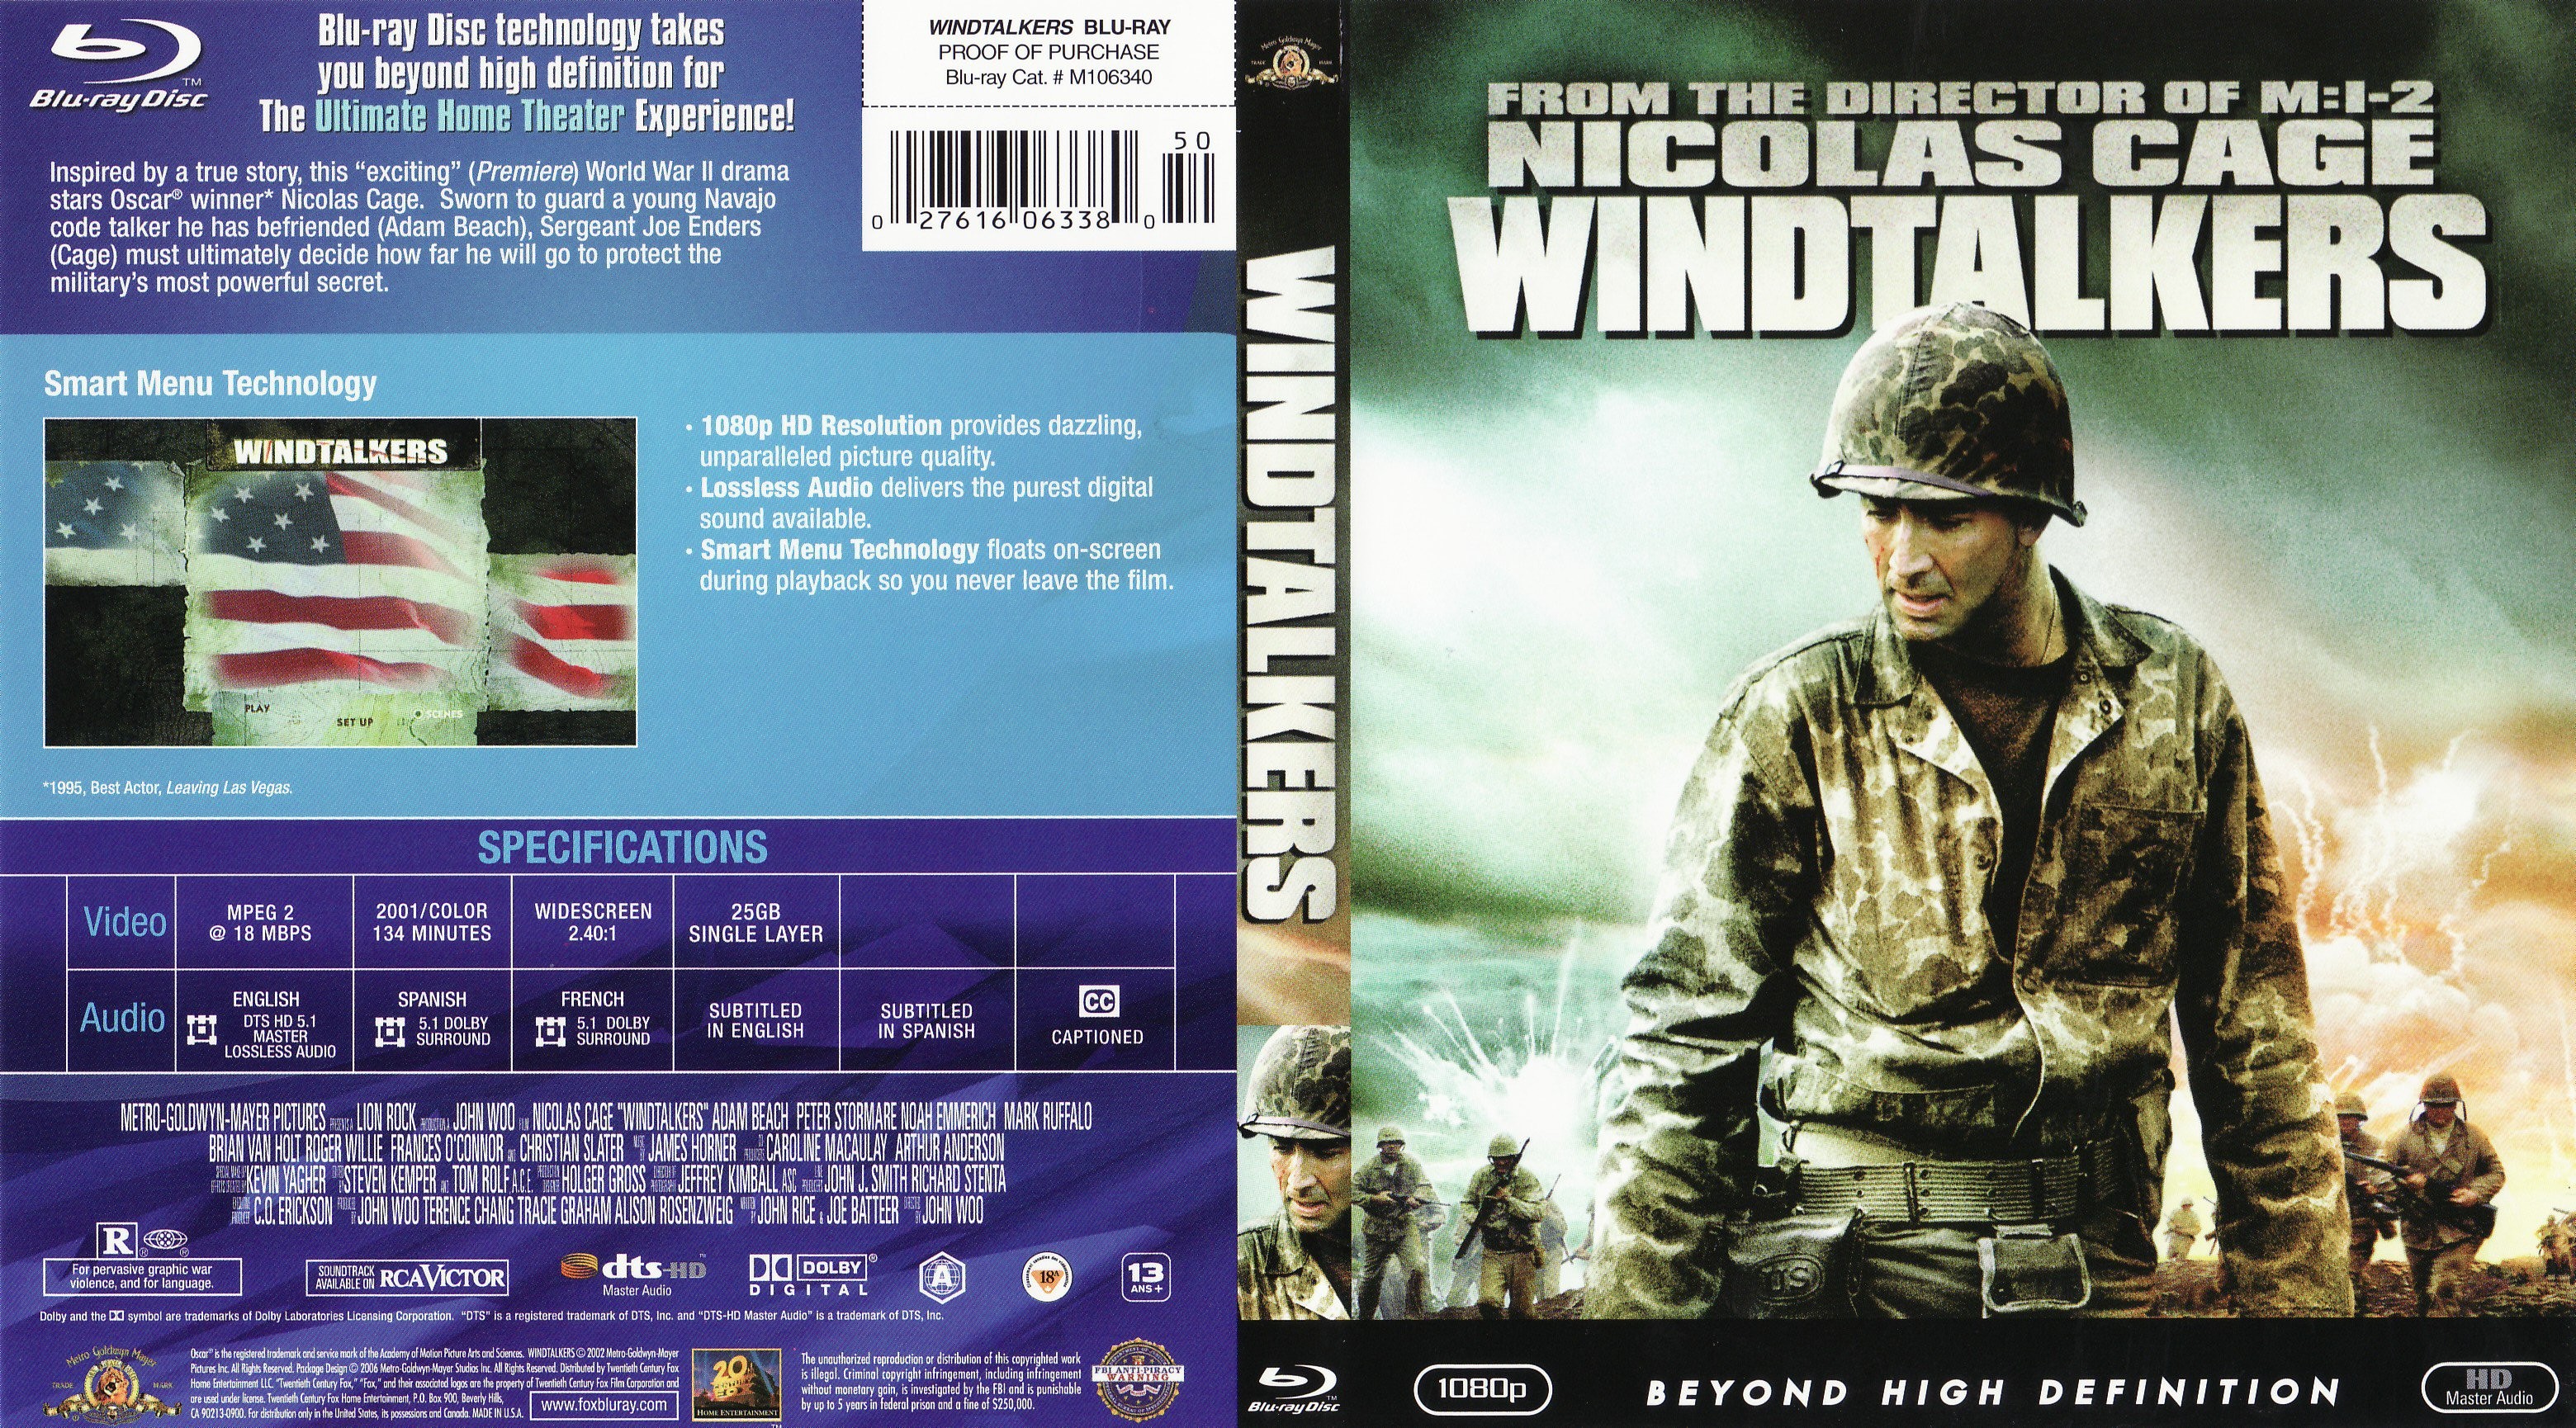 Jaquette DVD Windtalkers (Canadienne) (BLU-RAY)